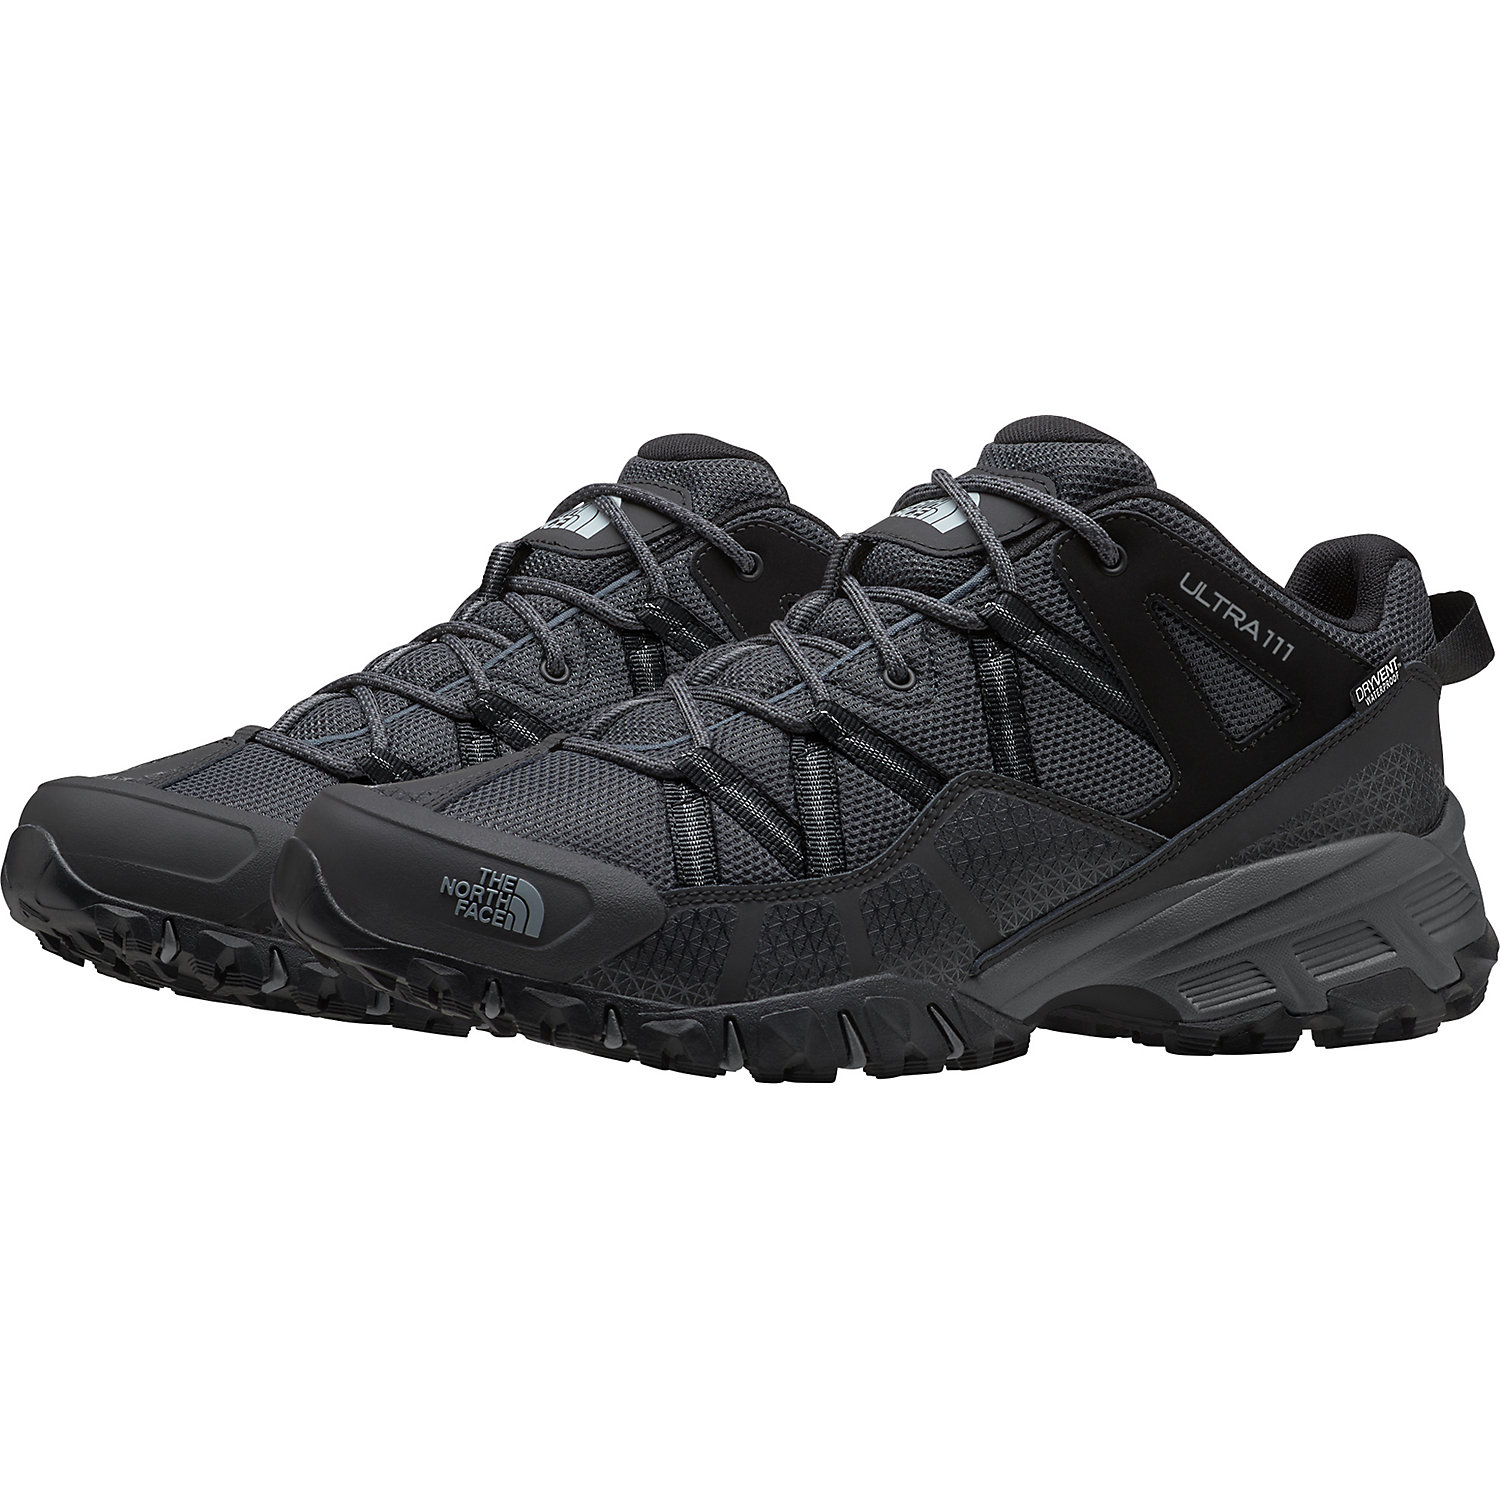 The North Face Mens Ultra 111 Waterproof Shoe